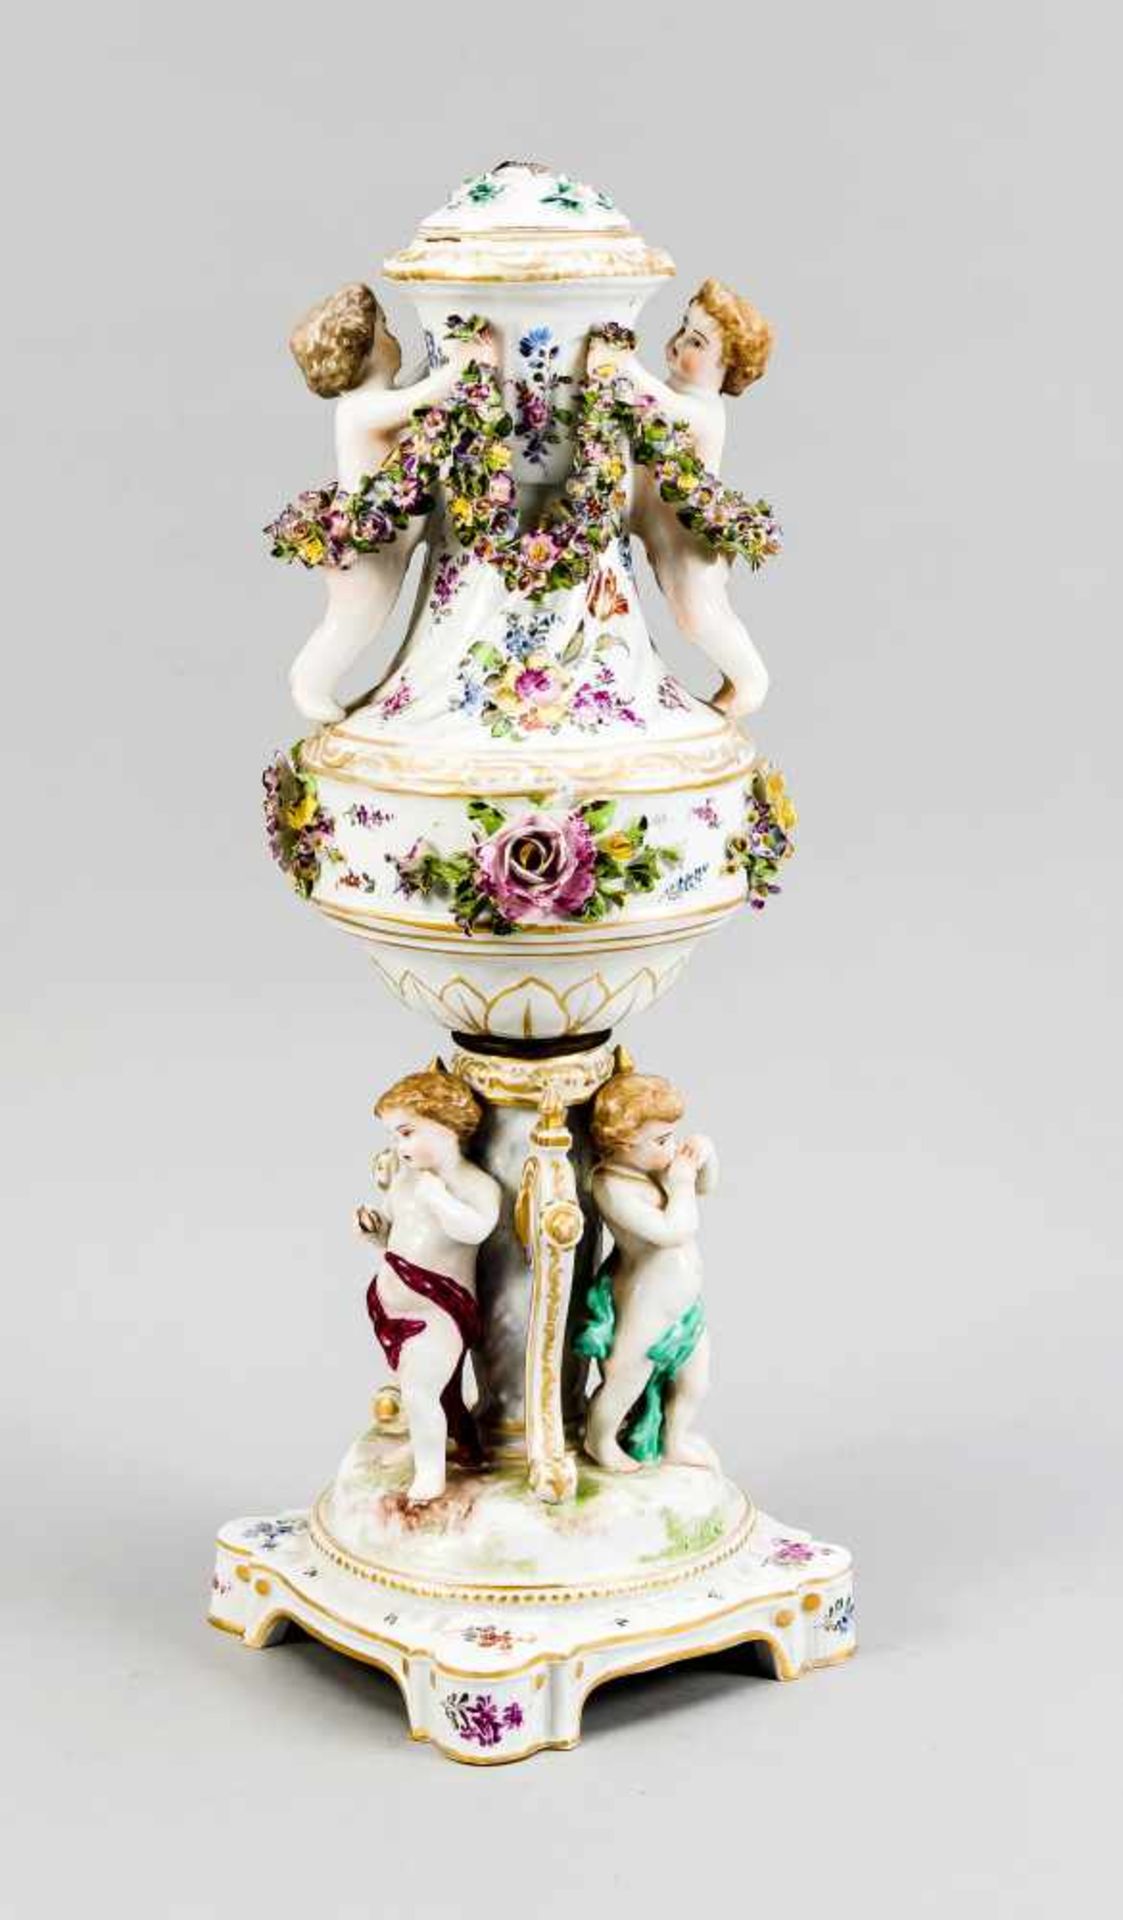 Loving couple, Triebner, Ens & Co., Volkstedt, Thuringia, mark 1894-1895, cavalier with